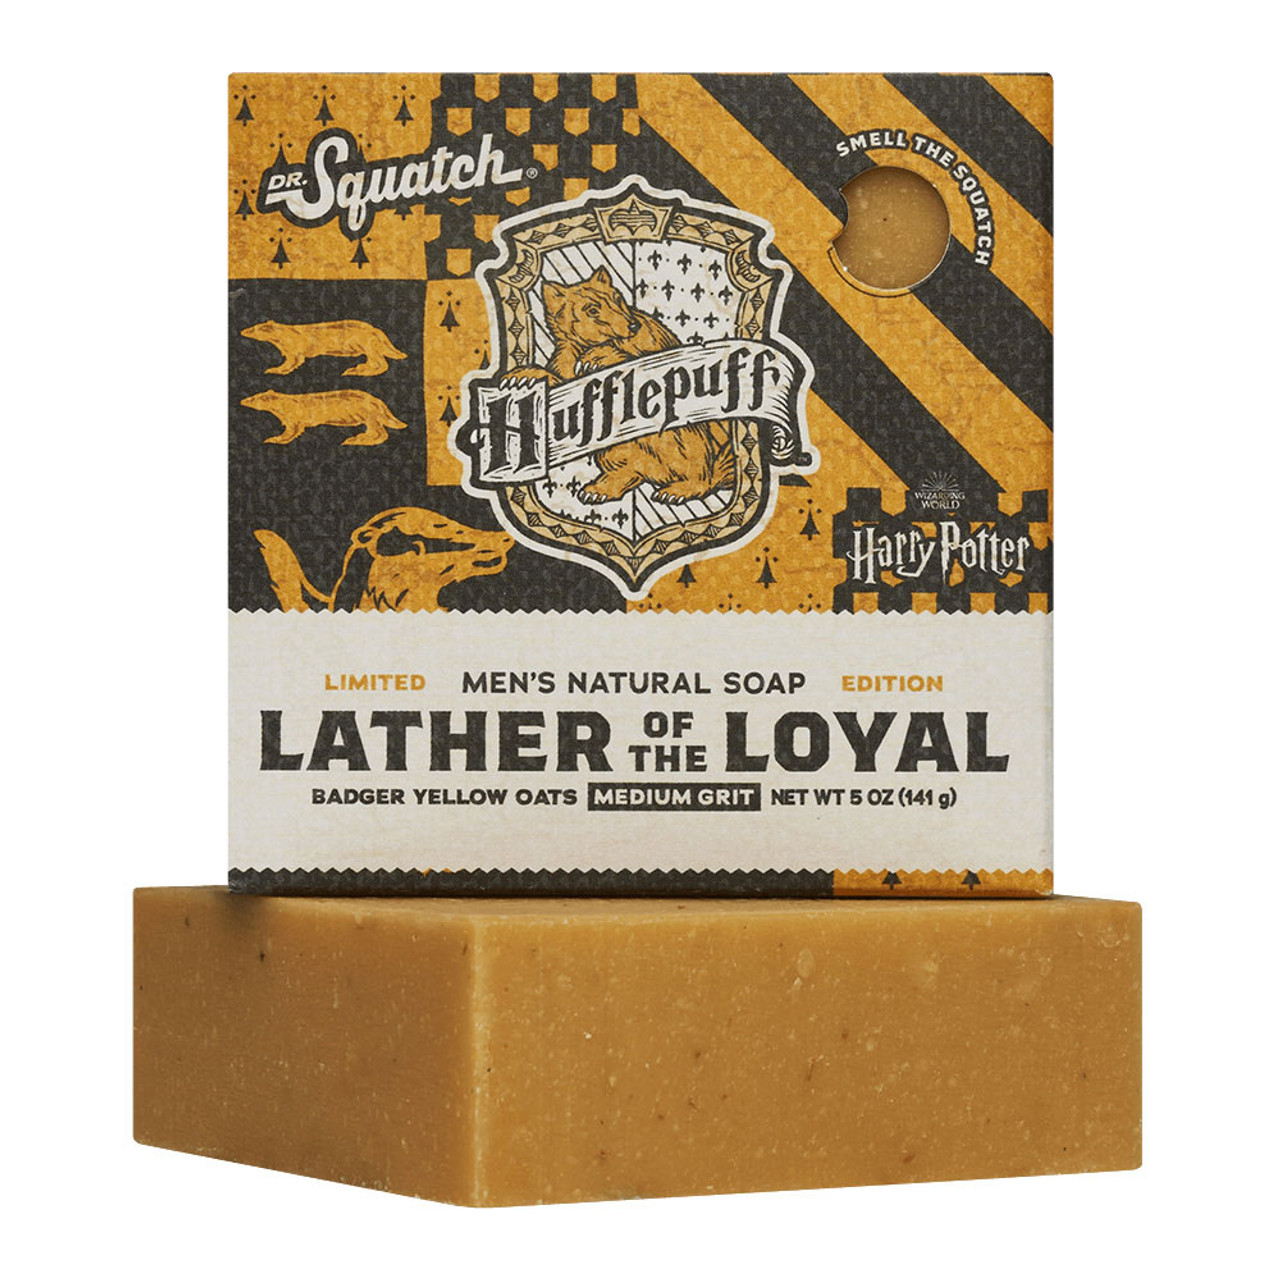 https://cdn11.bigcommerce.com/s-zut1msomd6/images/stencil/1280x1280/products/41428/244332/dr-squatch-lather-of-the-loyal-bar-soap-bar-hll-01-hufflepf-hufflepuff-main__44110.1701729403.jpg?c=1